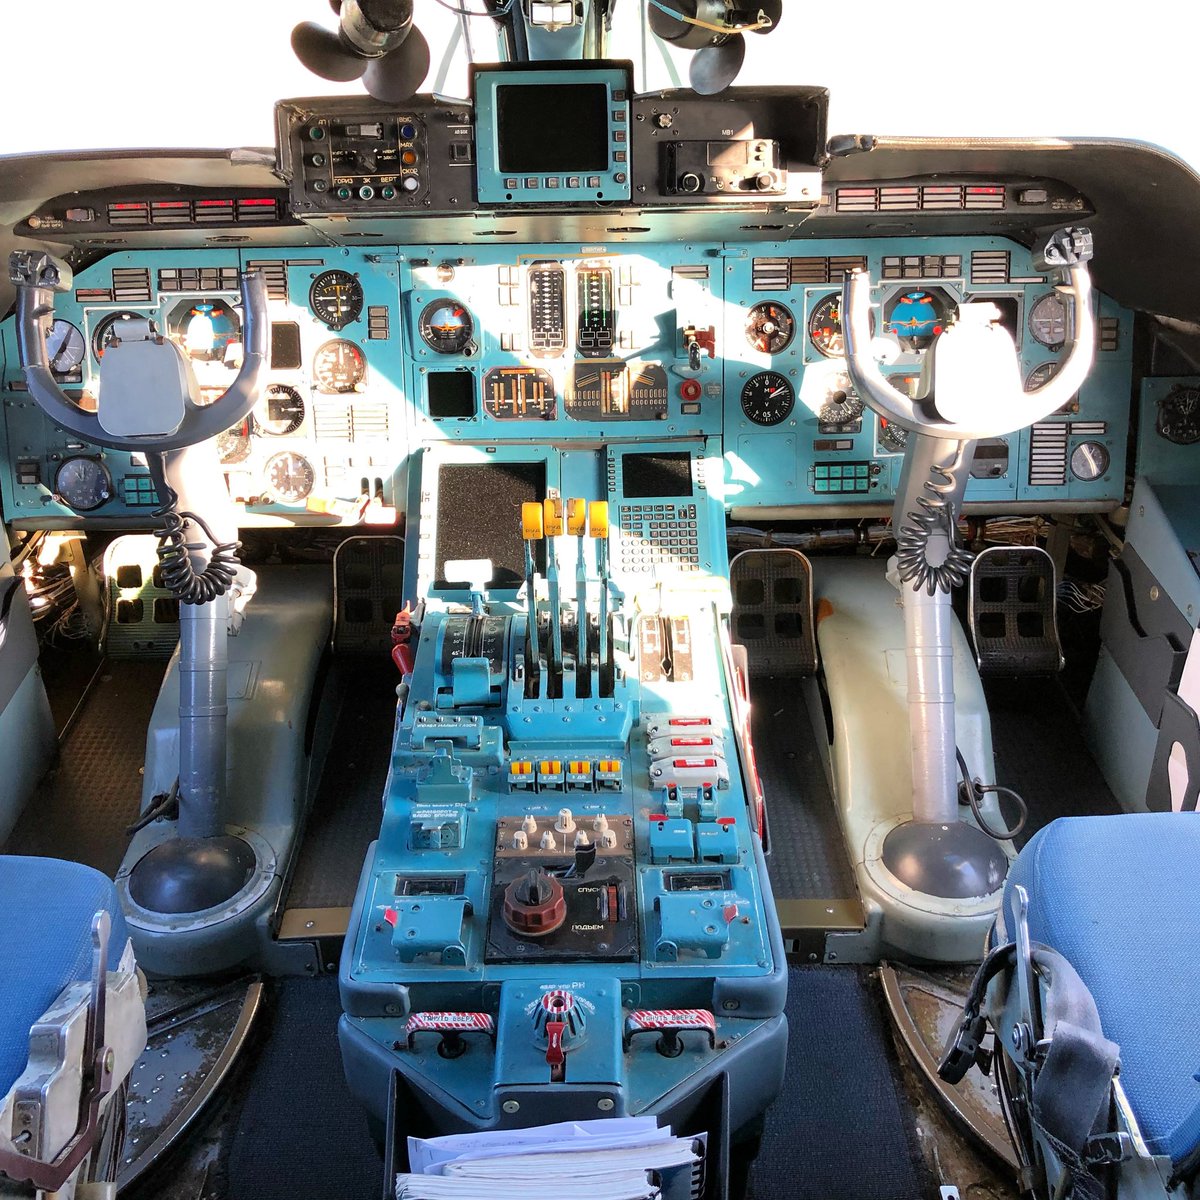 Which one do you fancy ? 

#Cockpit #PilotsofTwitter